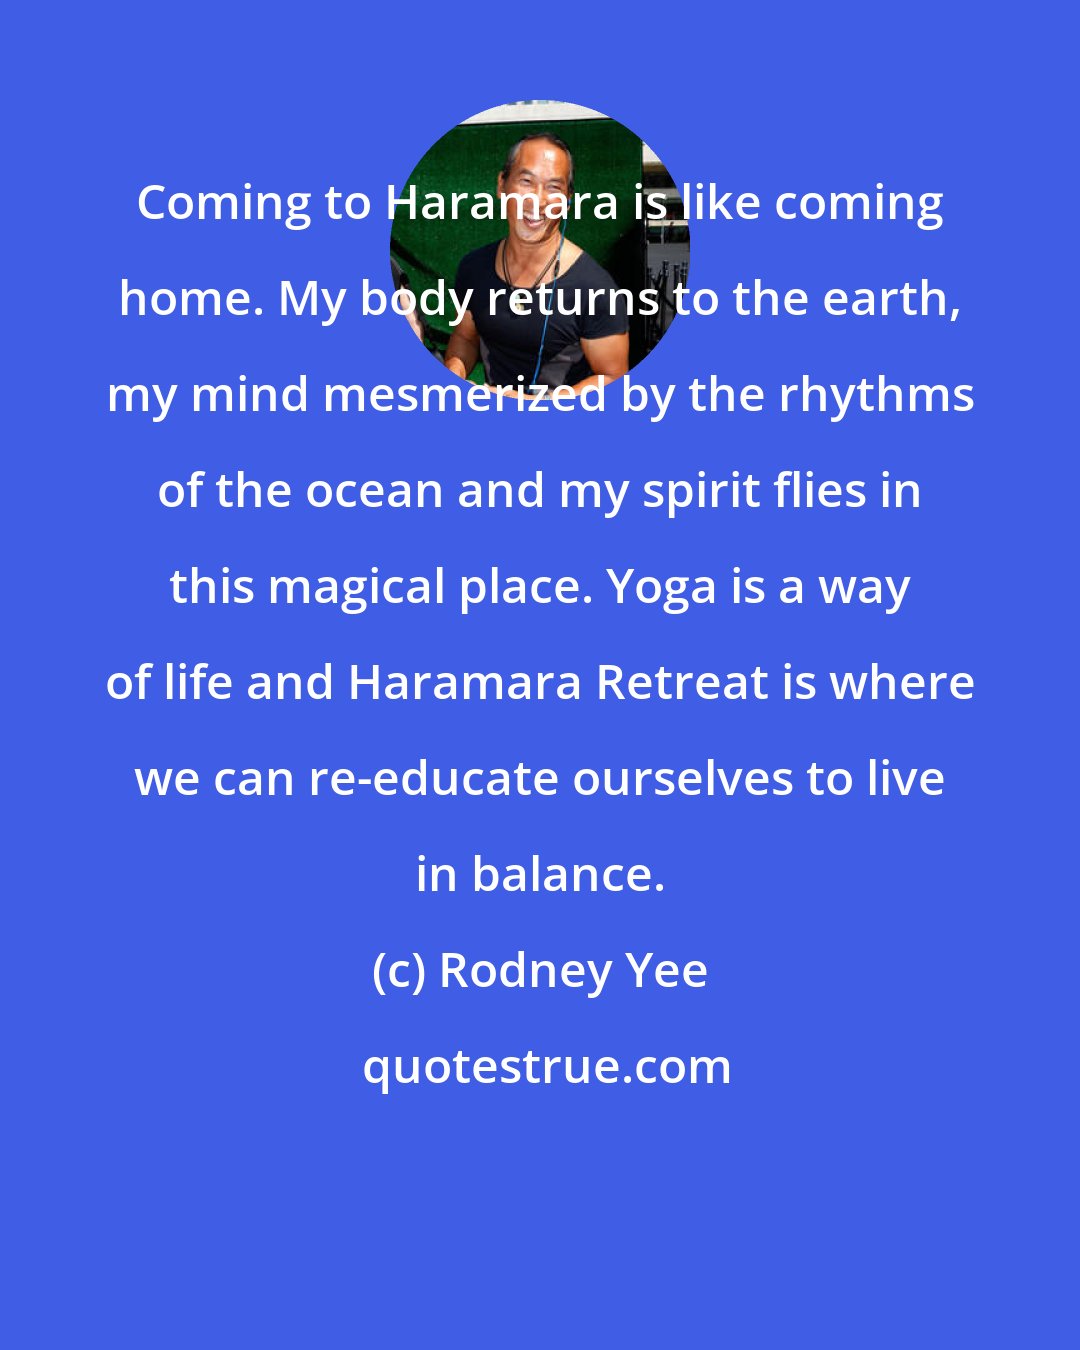 Rodney Yee: Coming to Haramara is like coming home. My body returns to the earth, my mind mesmerized by the rhythms of the ocean and my spirit flies in this magical place. Yoga is a way of life and Haramara Retreat is where we can re-educate ourselves to live in balance.